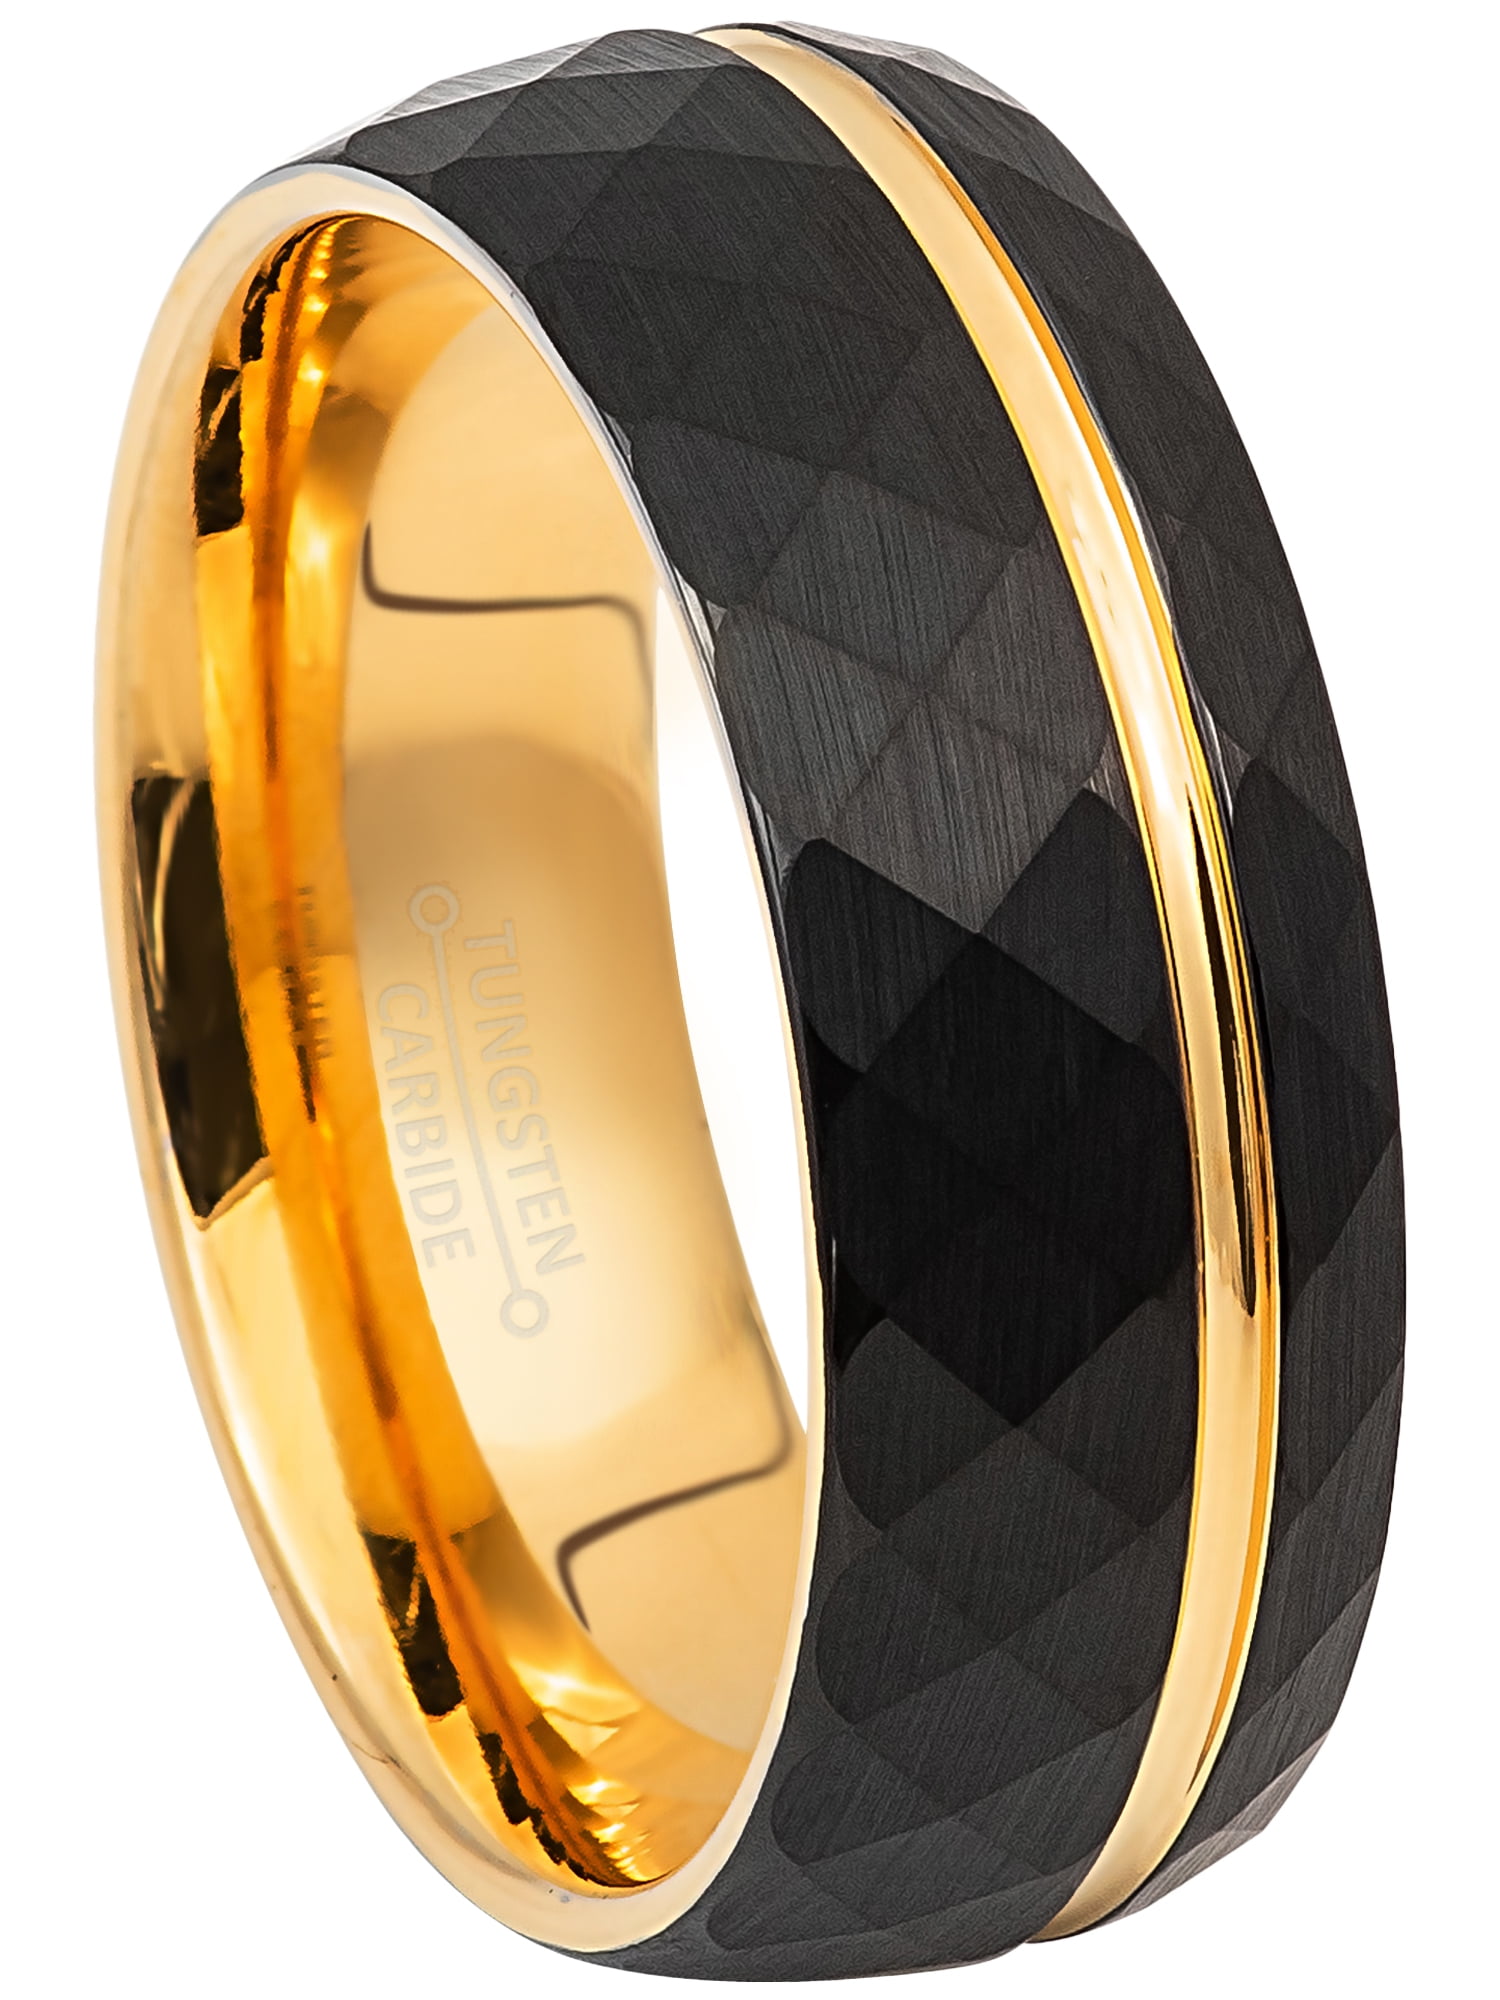 His & Her's 8MM/6MM Tungsten Carbide Classic Domed Gold Plated High Polish Wedding Band Ring Set